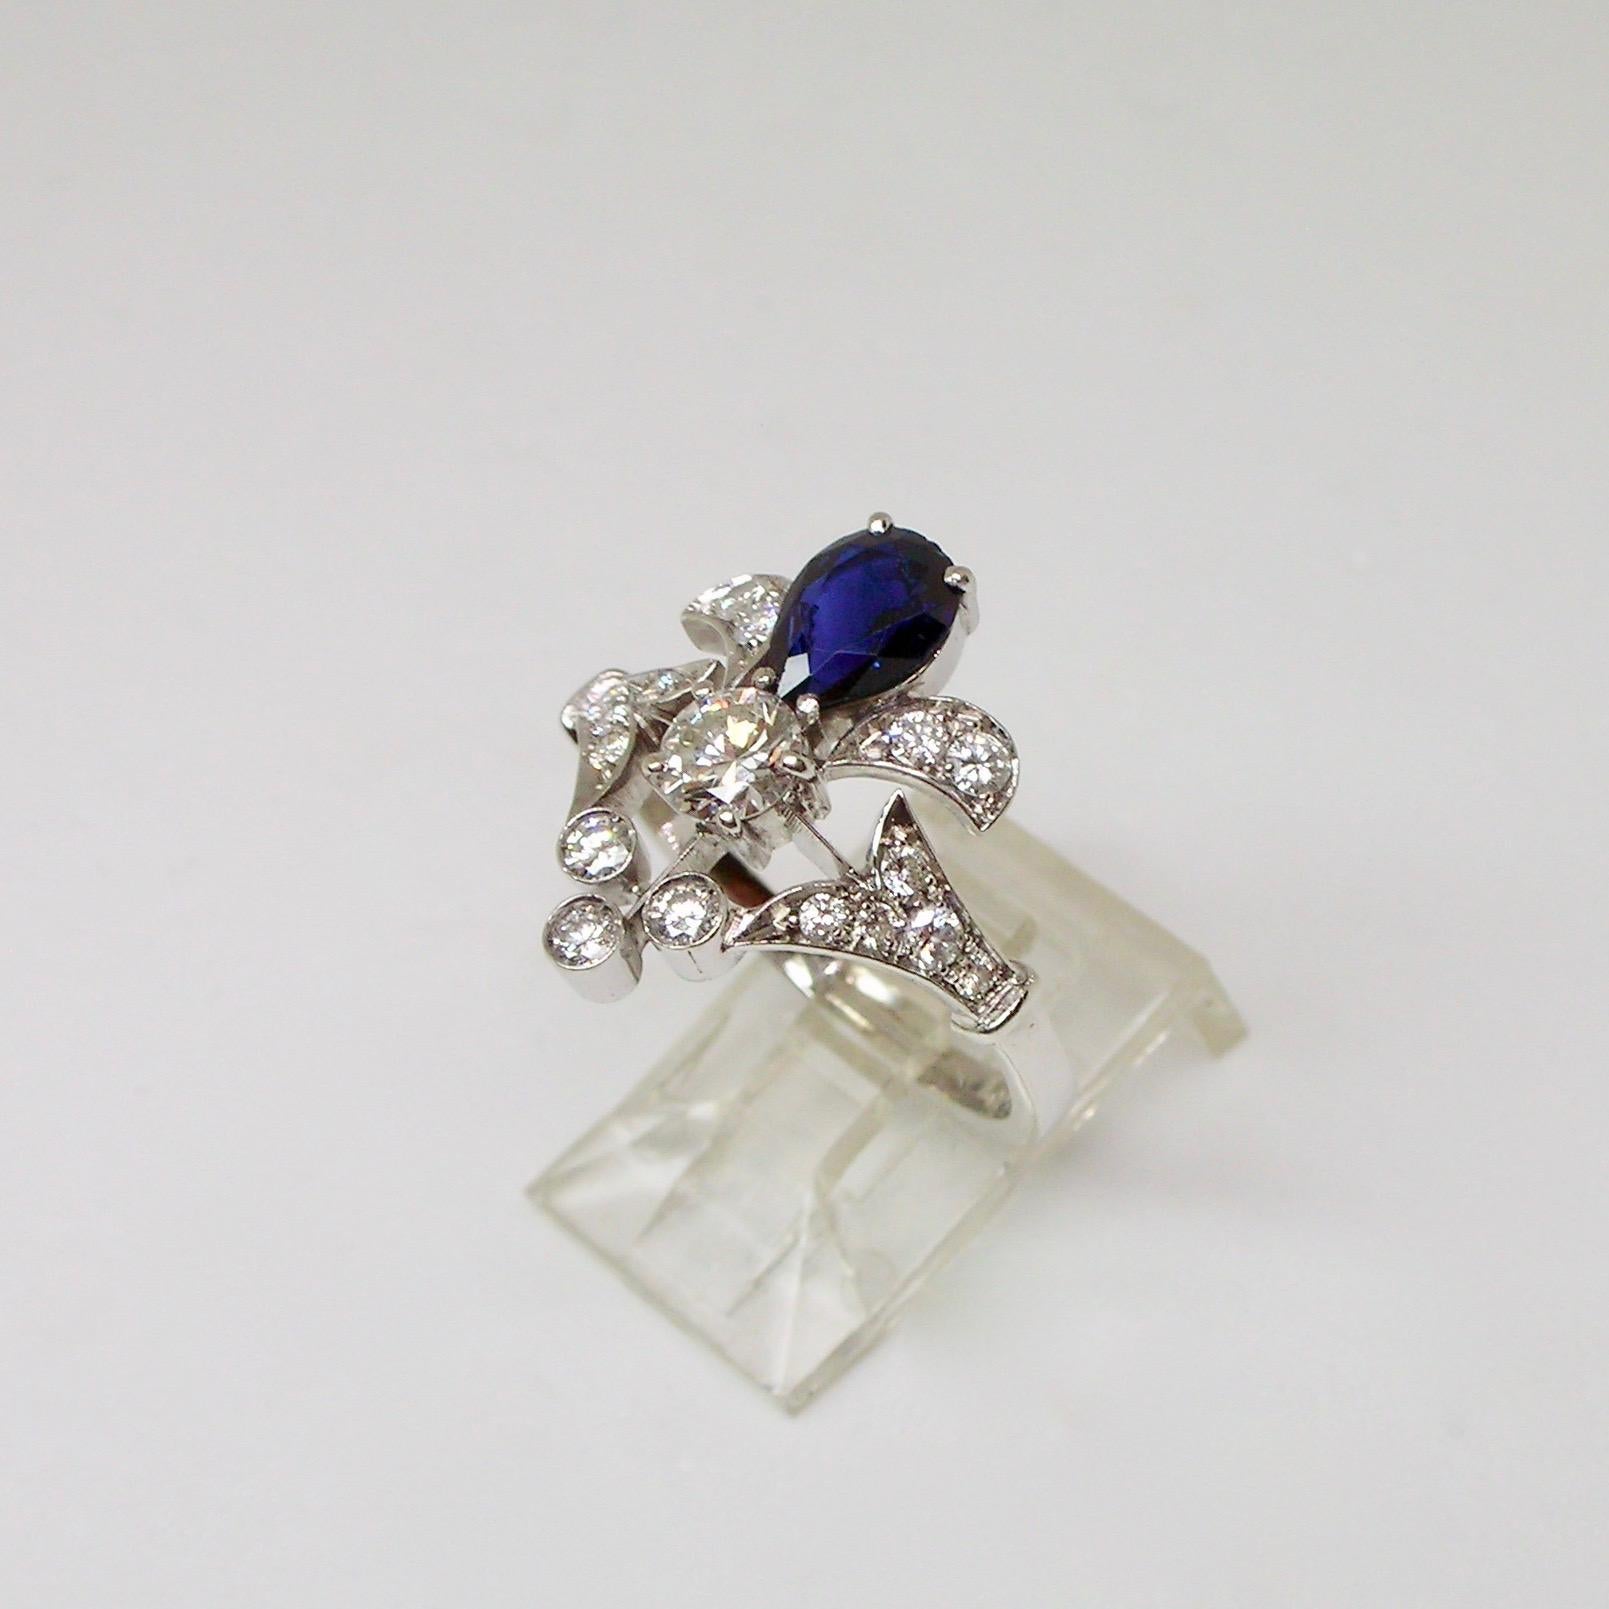 Floral design ring set in 18 carat white gold with round cut diamonds for approximately 1 carat total weight and a drop cut natural sapphire of good intense blue. 
Ring from the 1960s period circa.

Italian ring size: 16.5

